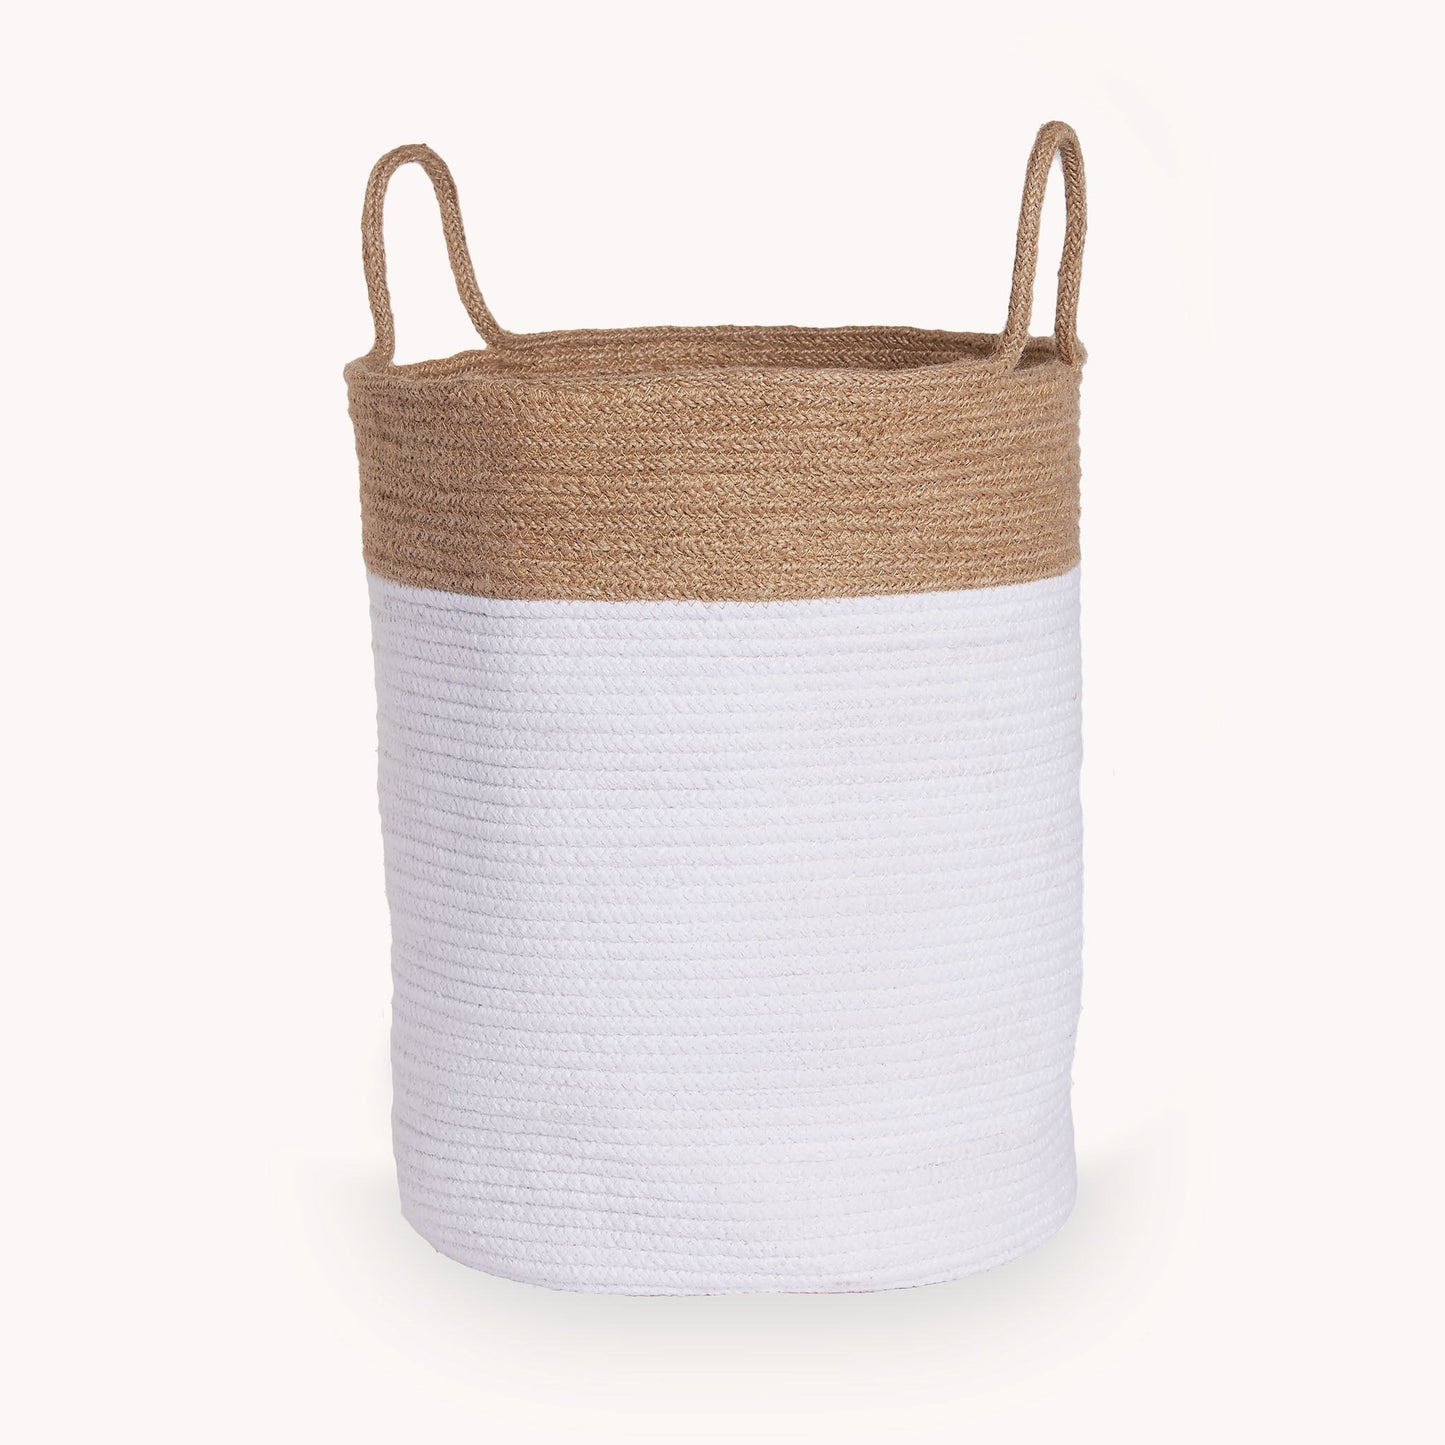 Cotton Jute Utility Basket - White and Natural